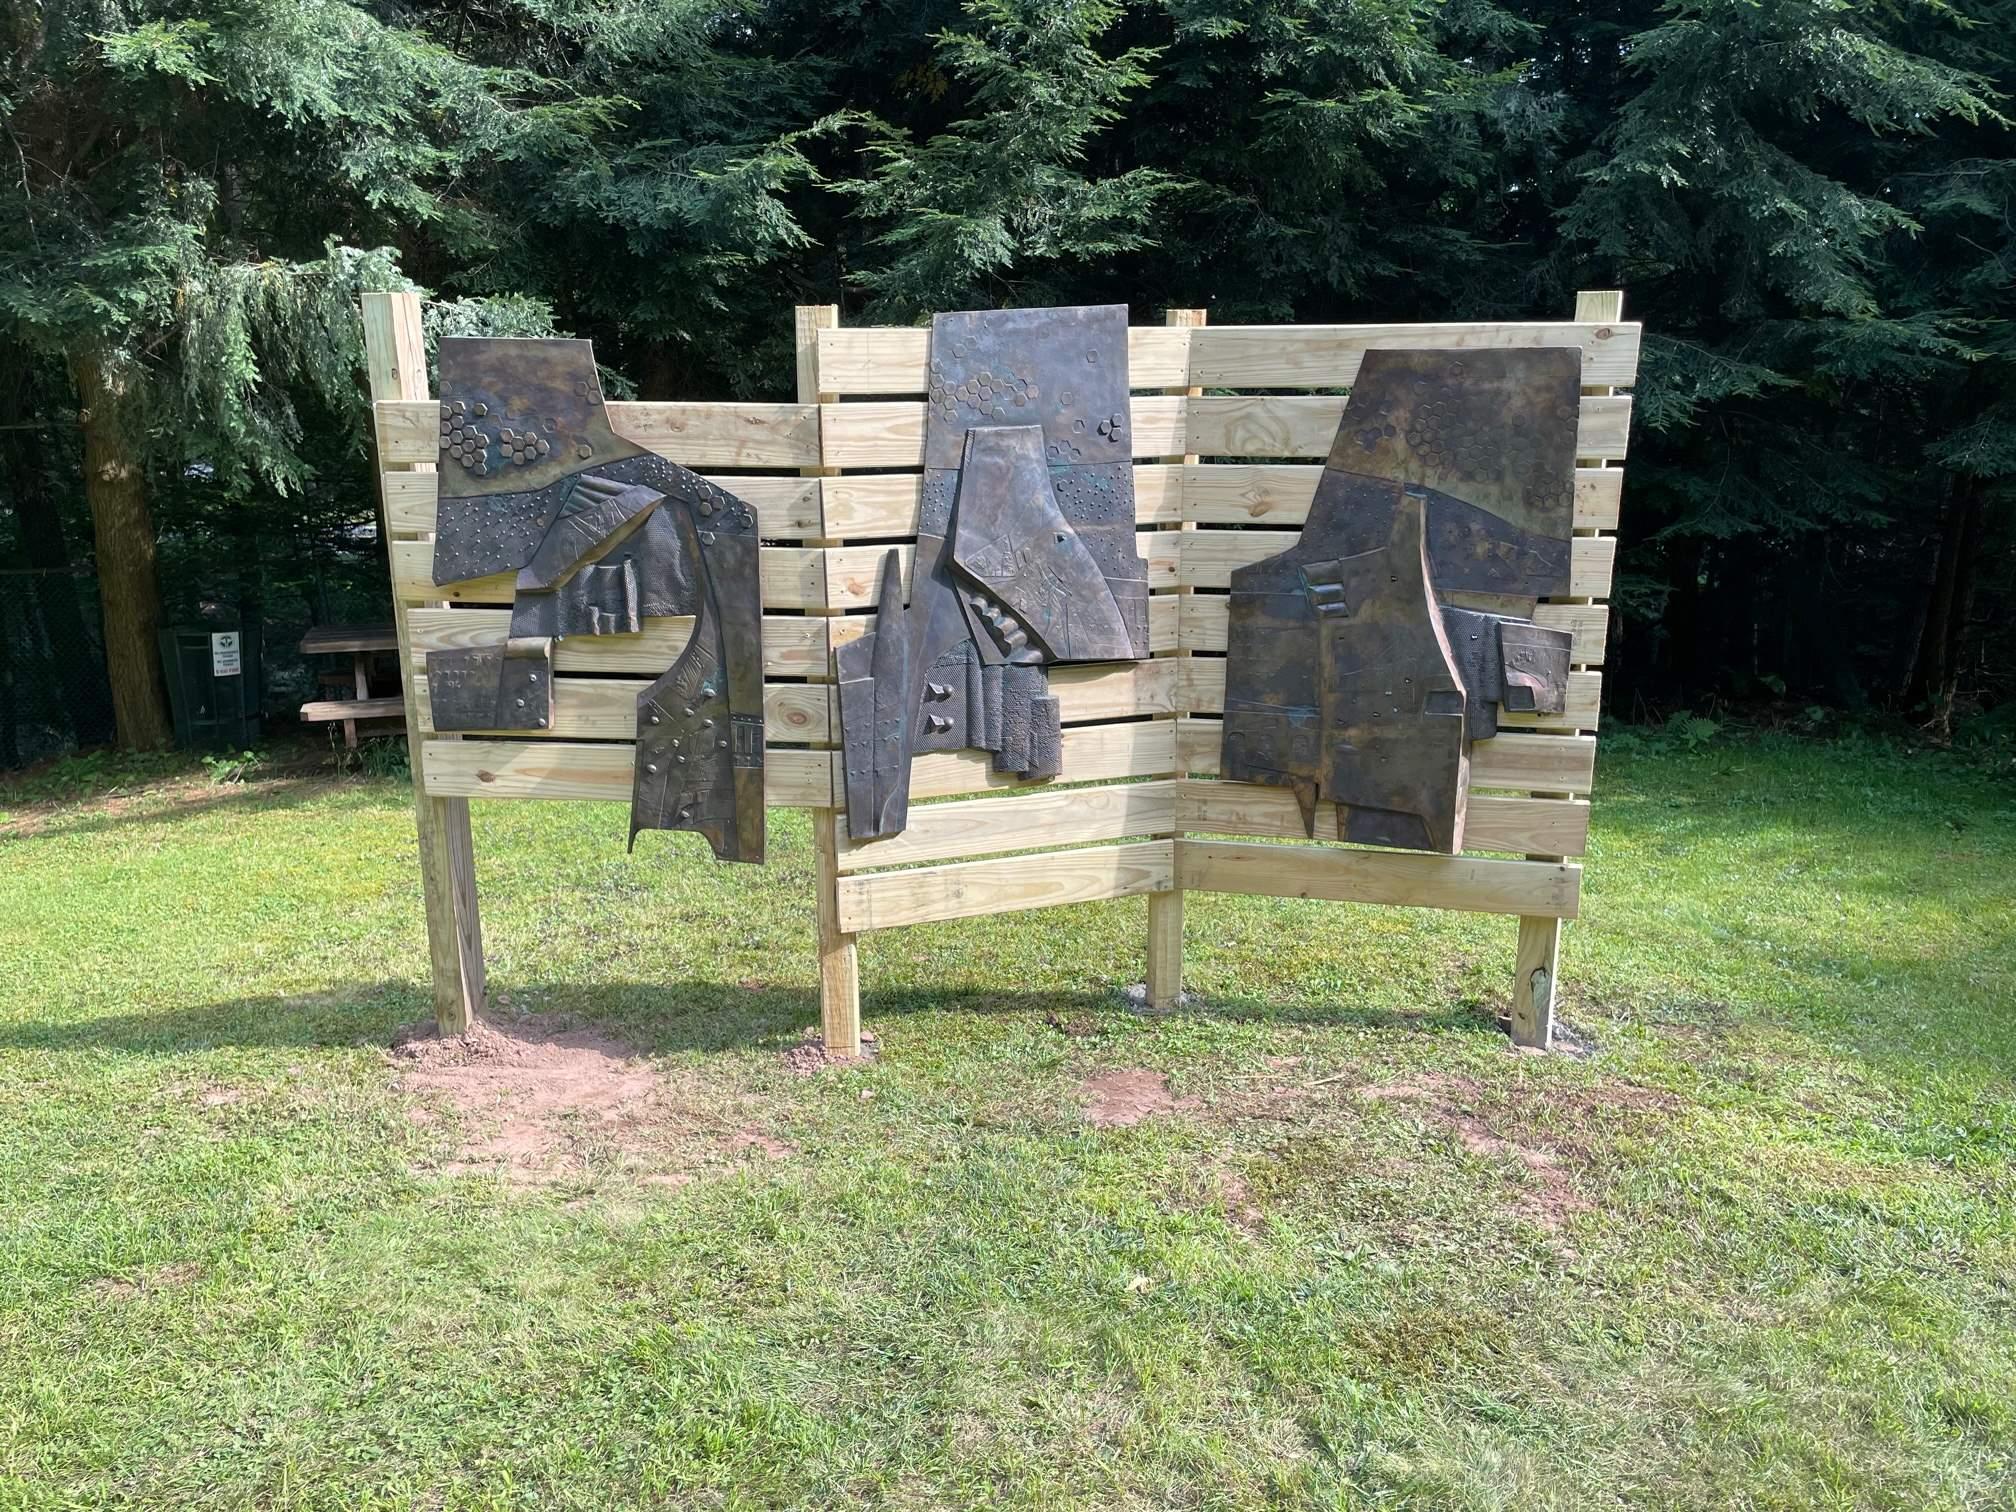 Beehive Frame No 1, No 2 and No 3 - Sculpture by Mykola Zhuravel